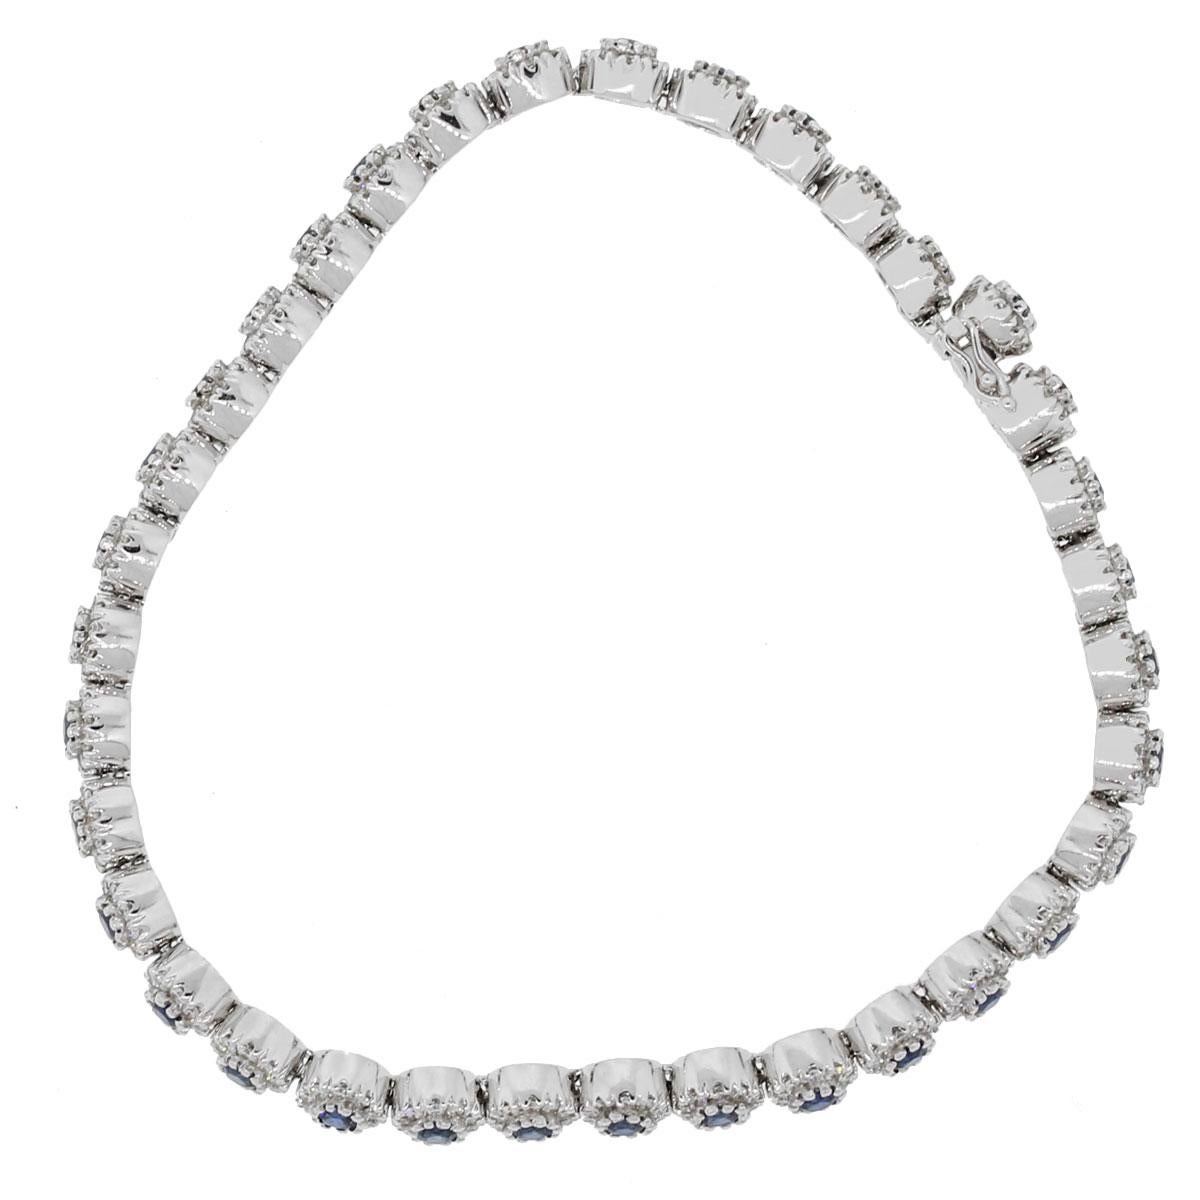 Material: 14k White Gold
Diamond Details: Approximately 1.71ctw of round brilliant cut diamonds. Diamonds are G/H in color and VS in clarity.
Gemstone Details: Approximately 2.29tw of round blue sapphire gemstones.
Measurements: 7″ x 0.19″ x